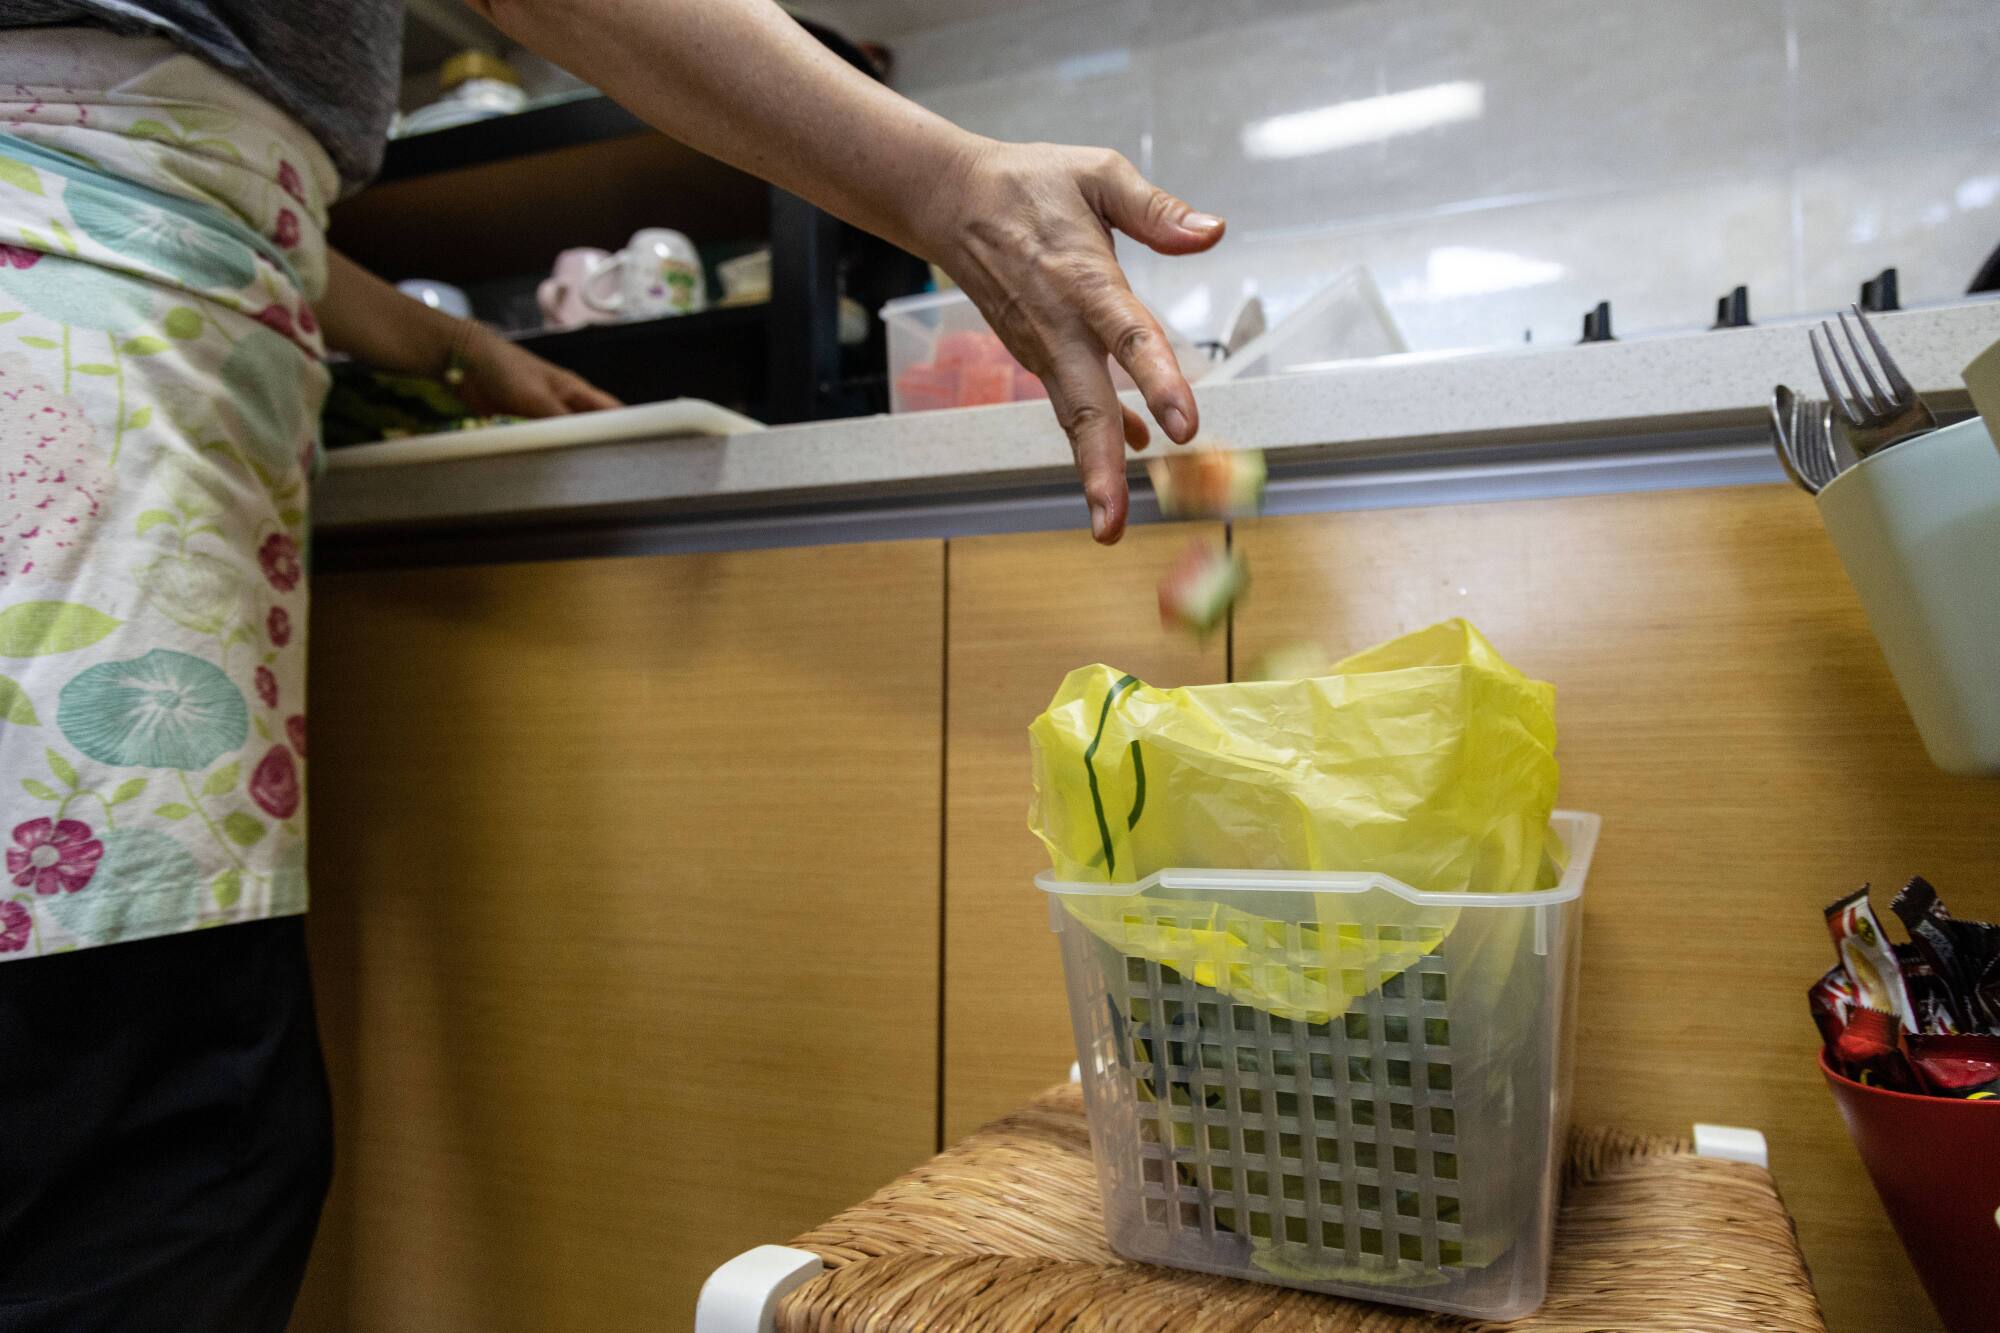 A woman disposes a waste from cutting a watermelon to a plastic bag designated for food waste at home.